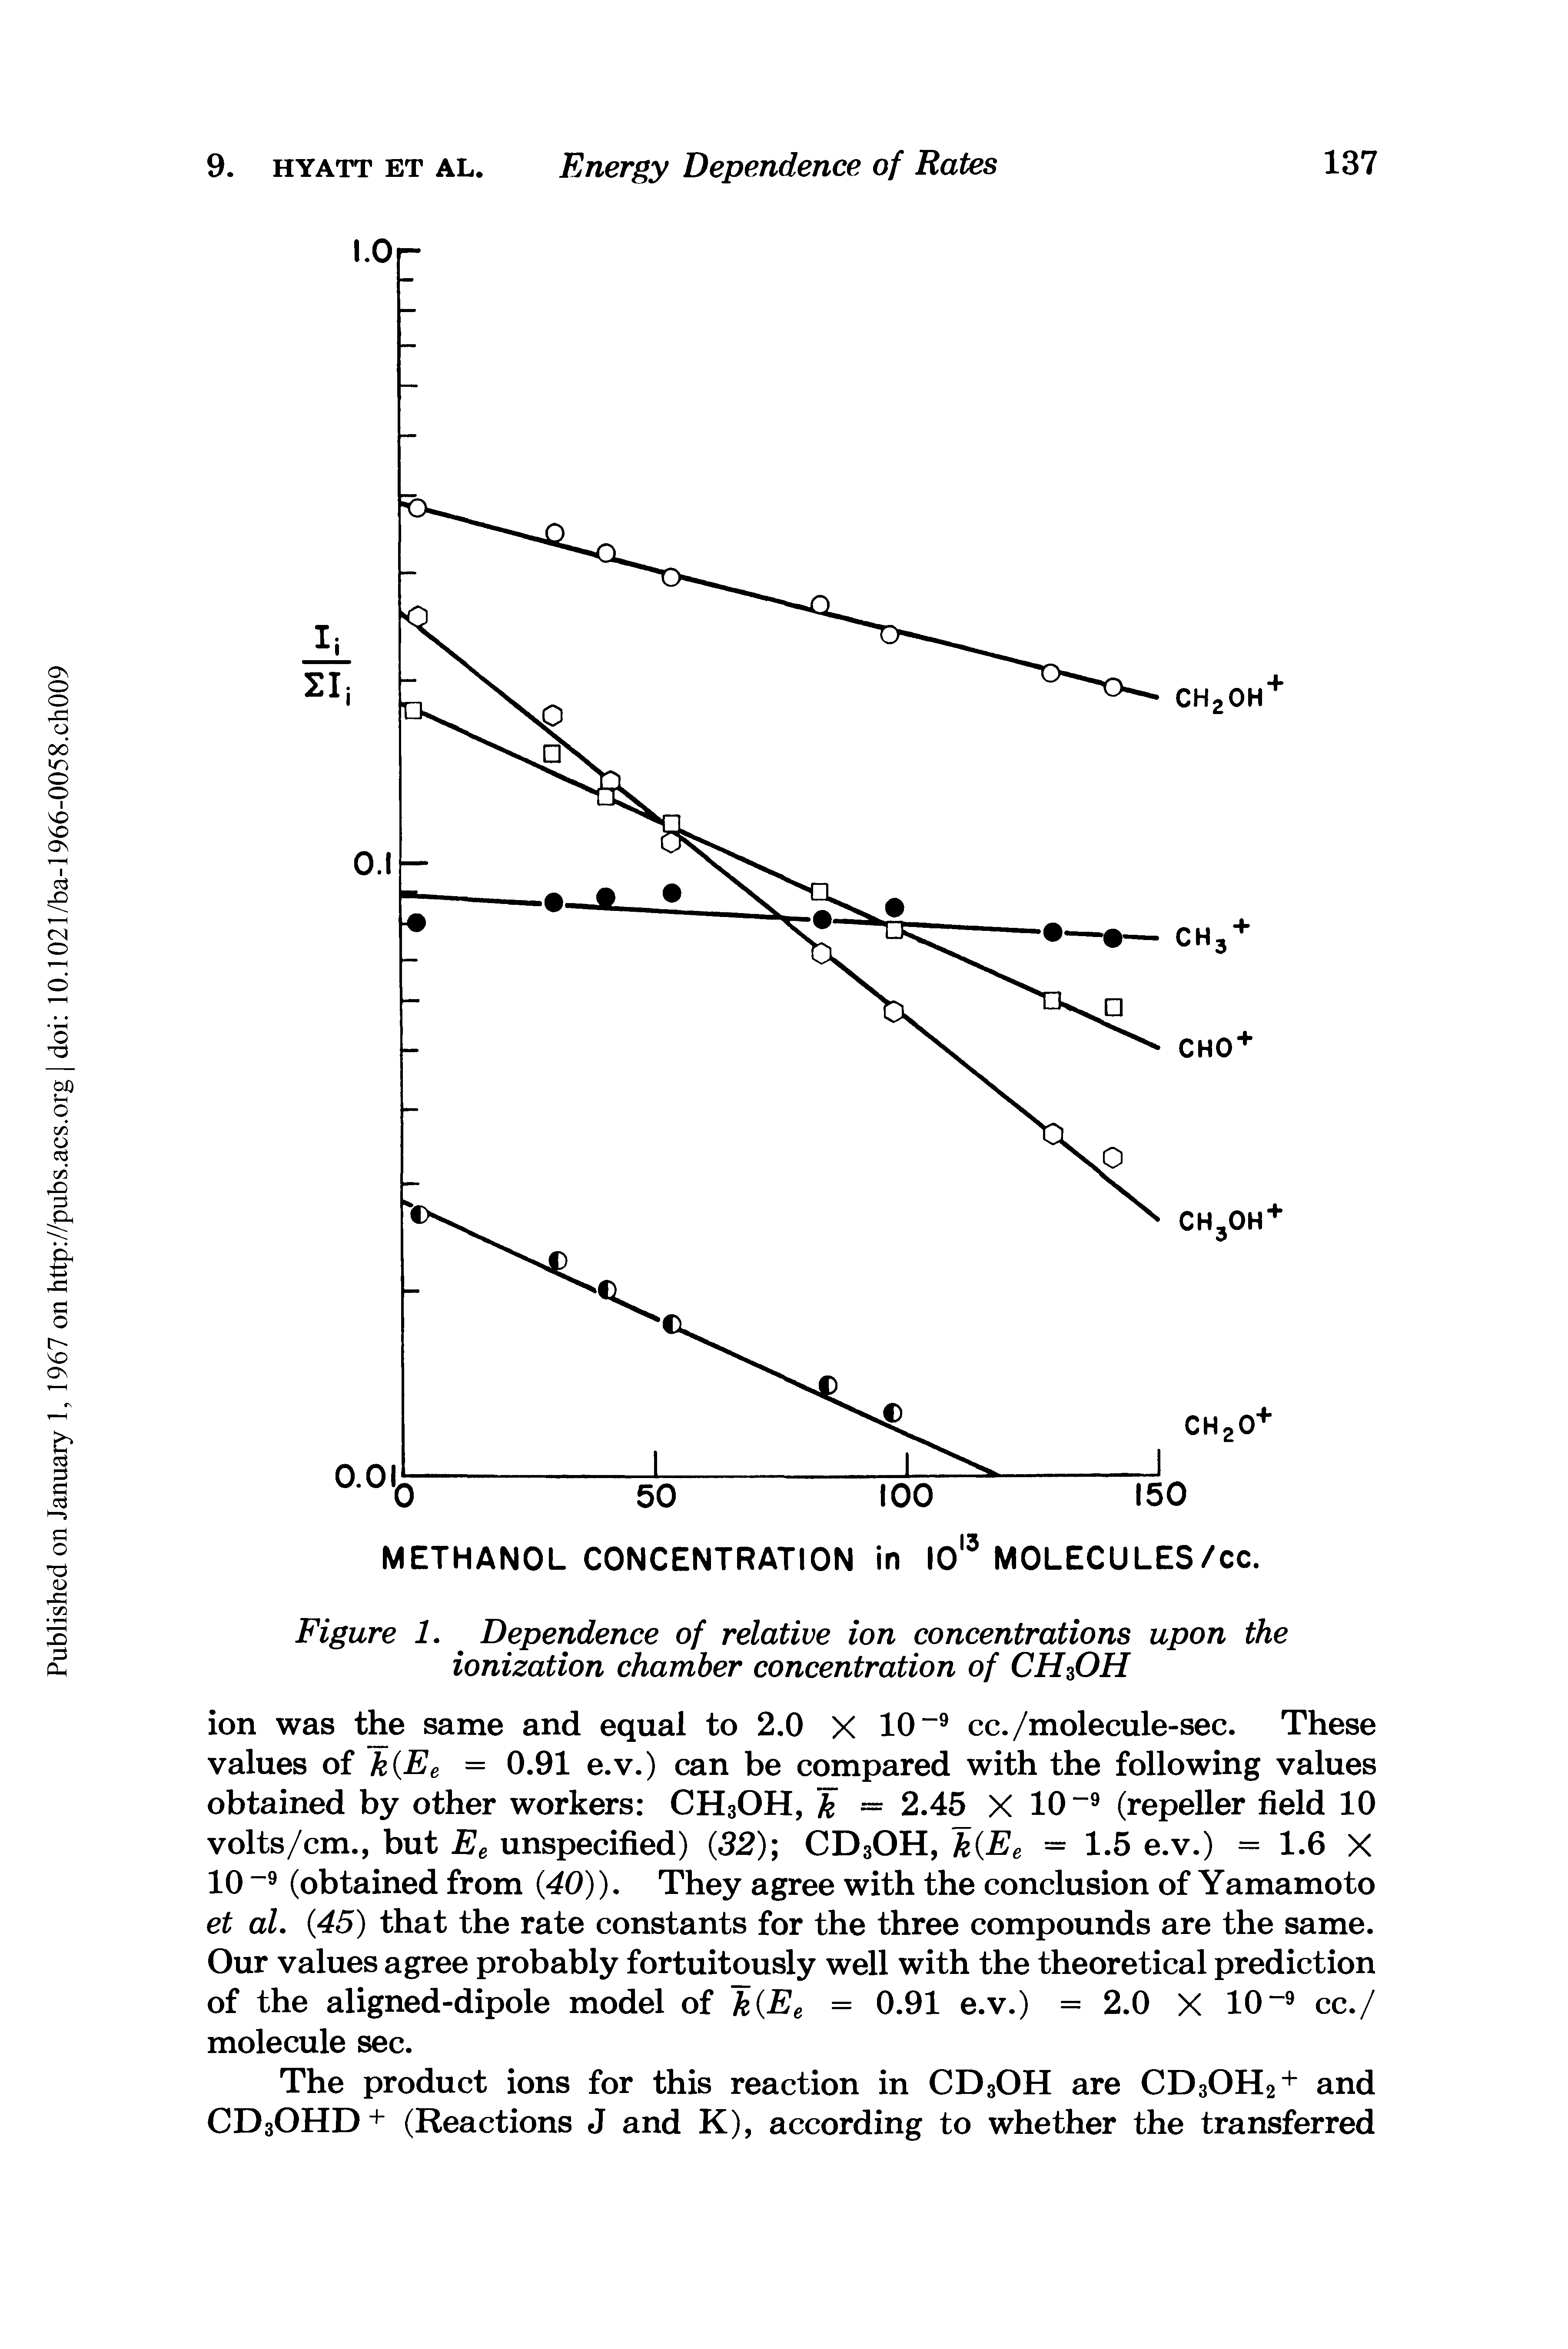 Figure 1. Dependence of relative ion concentrations upon the ionization chamber concentration of CH OH...